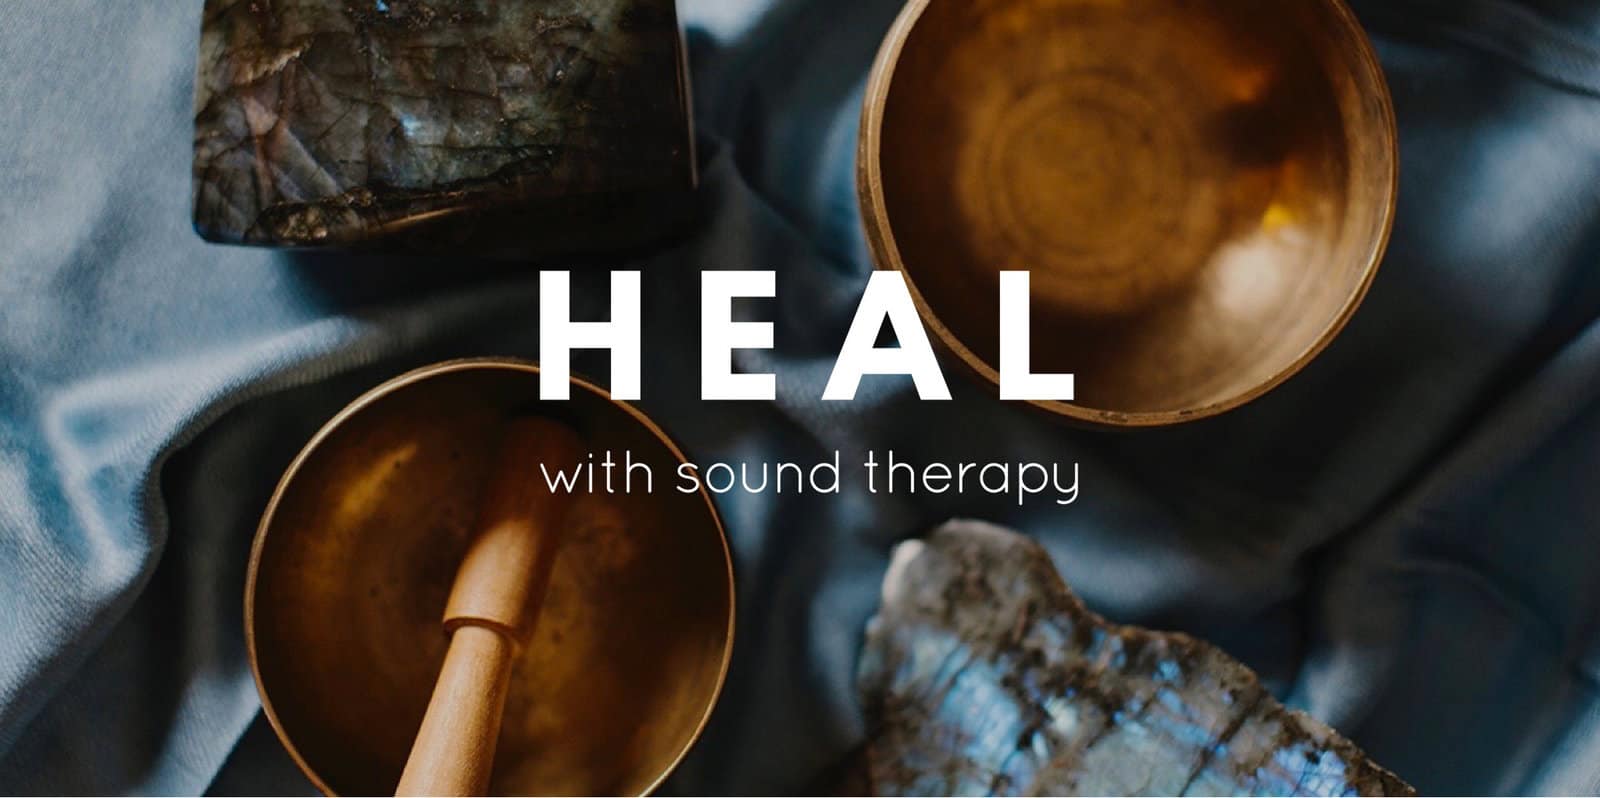 sound healing bowls for sound therapy